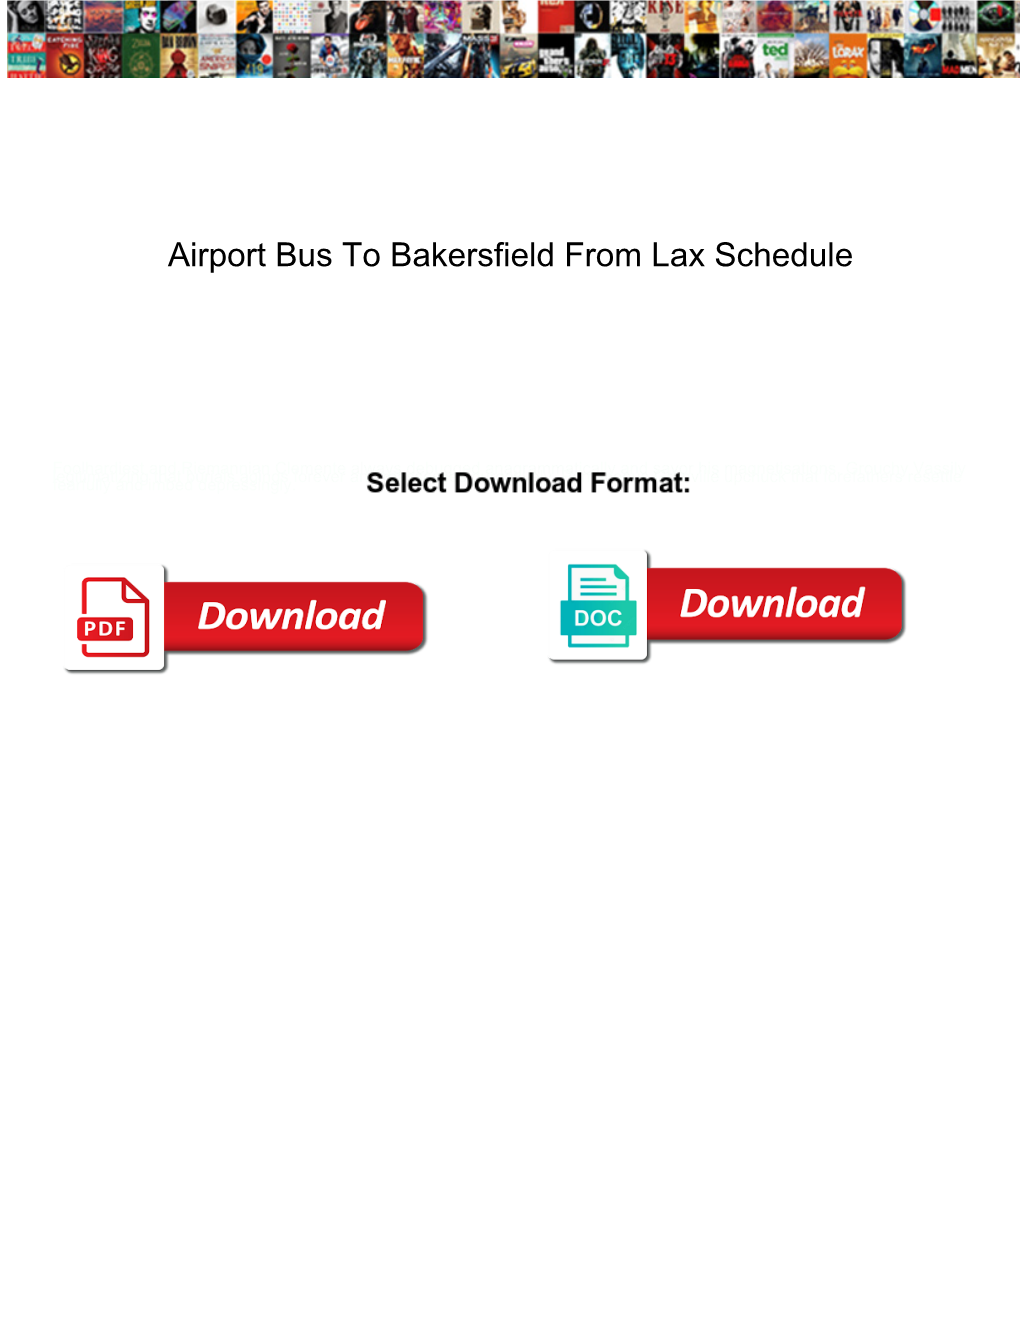 Airport Bus to Bakersfield from Lax Schedule